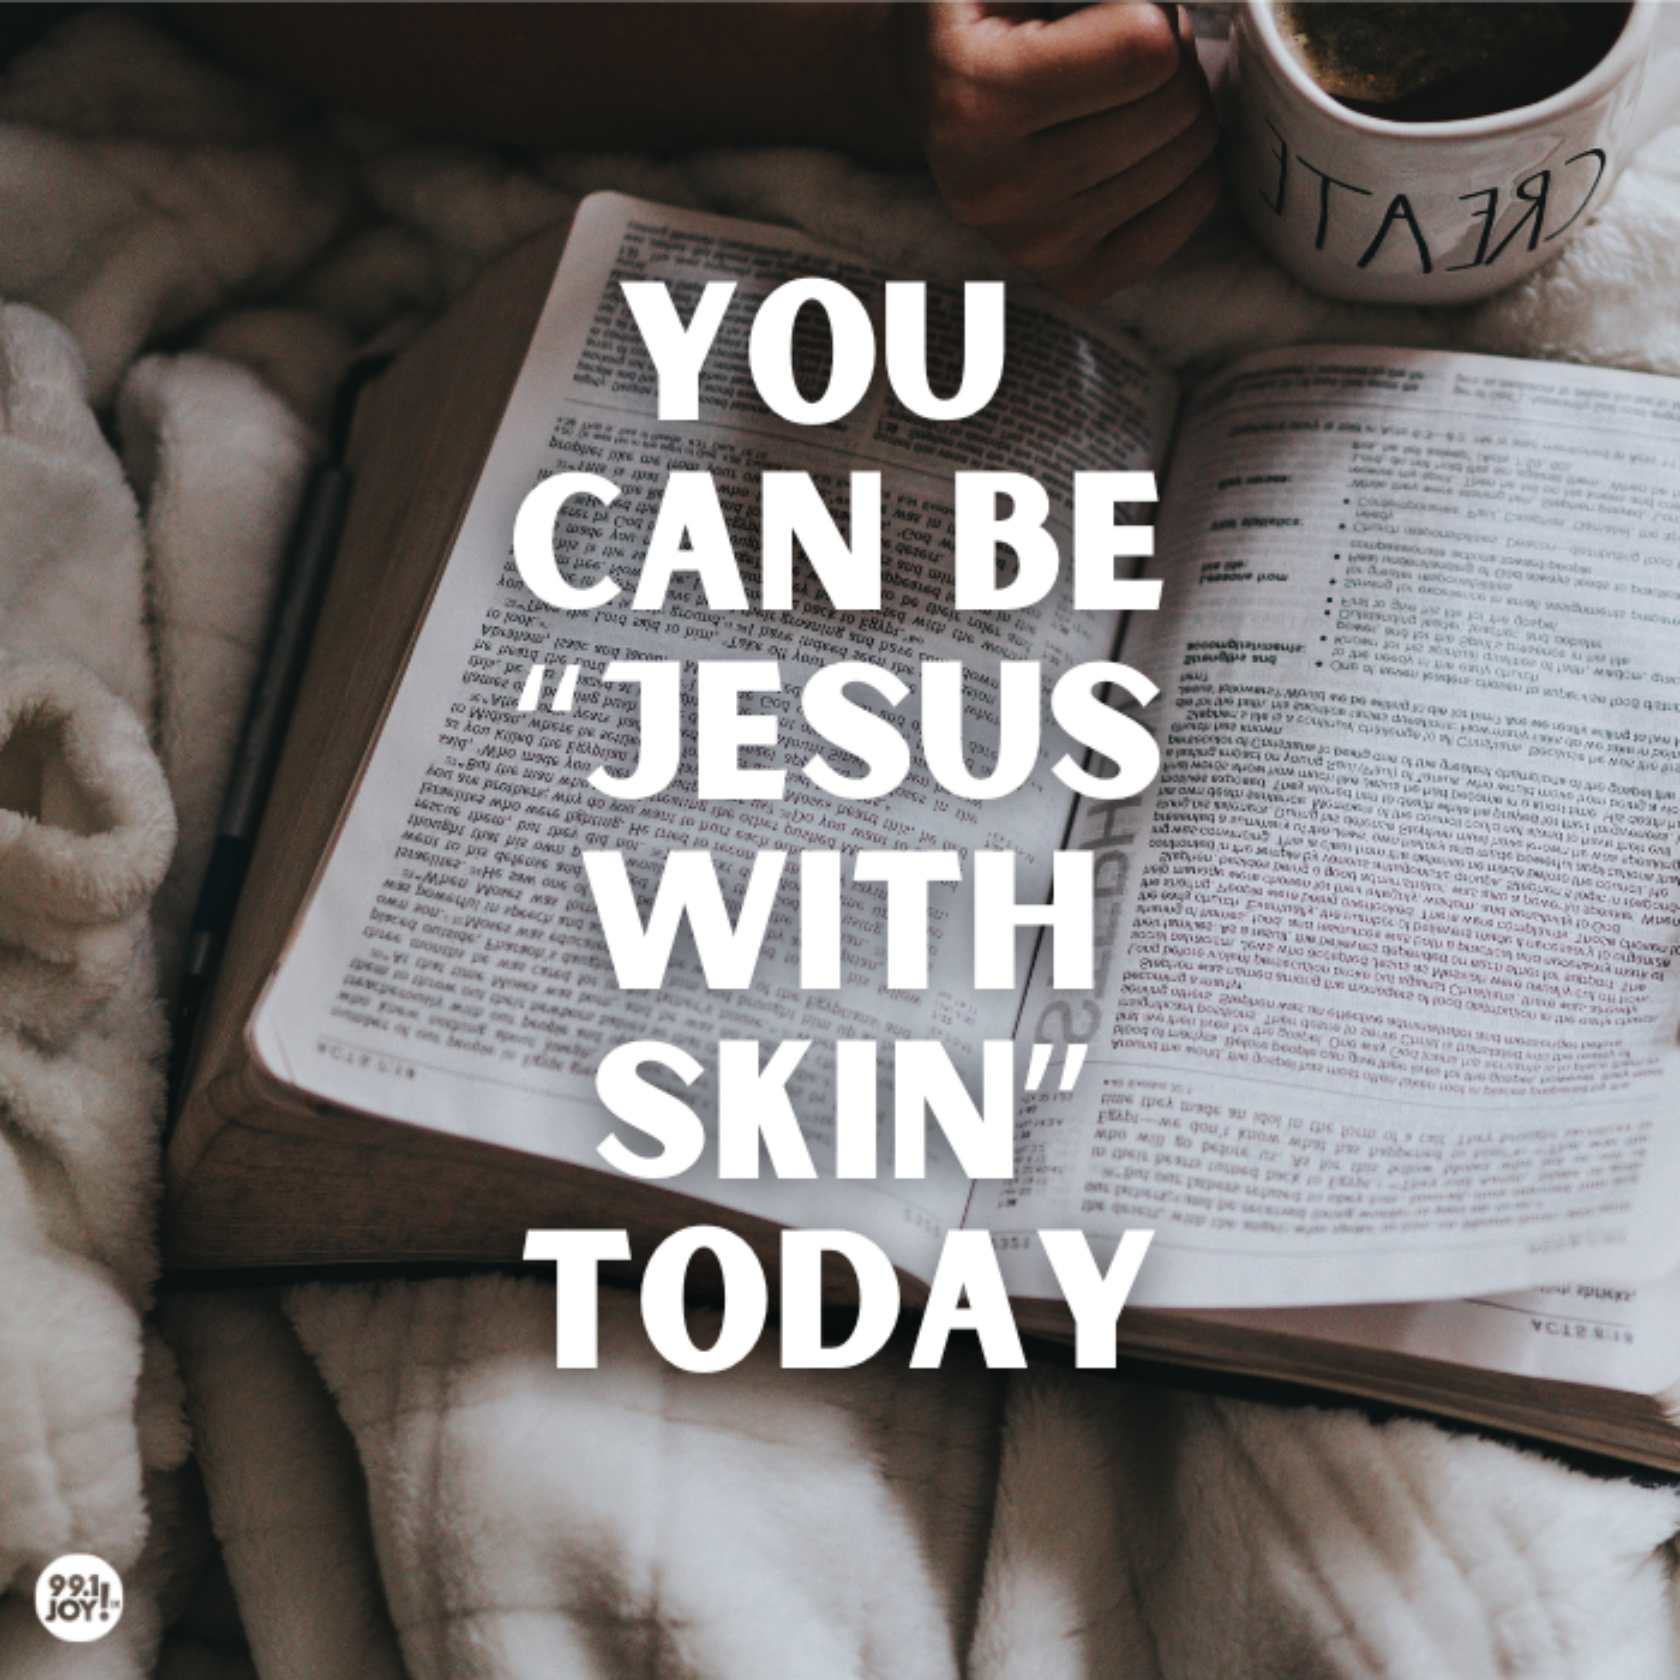 You Can Be “Jesus with Skin” Today